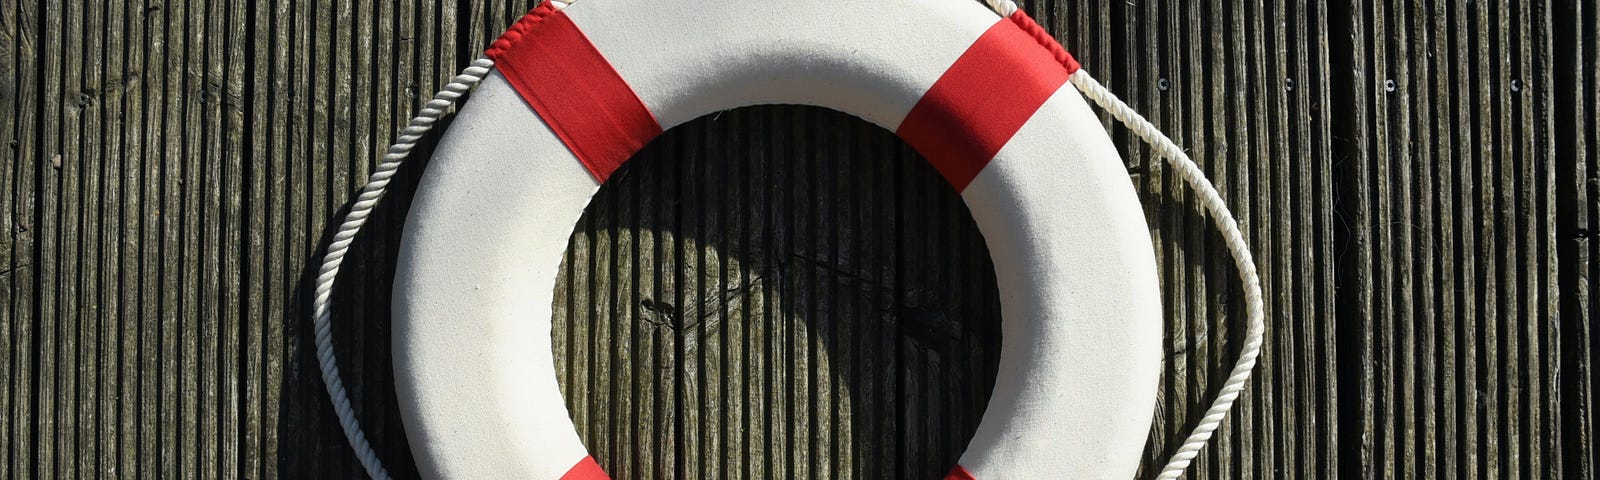 white life buoy (or life saver or life preserver) with red stripes